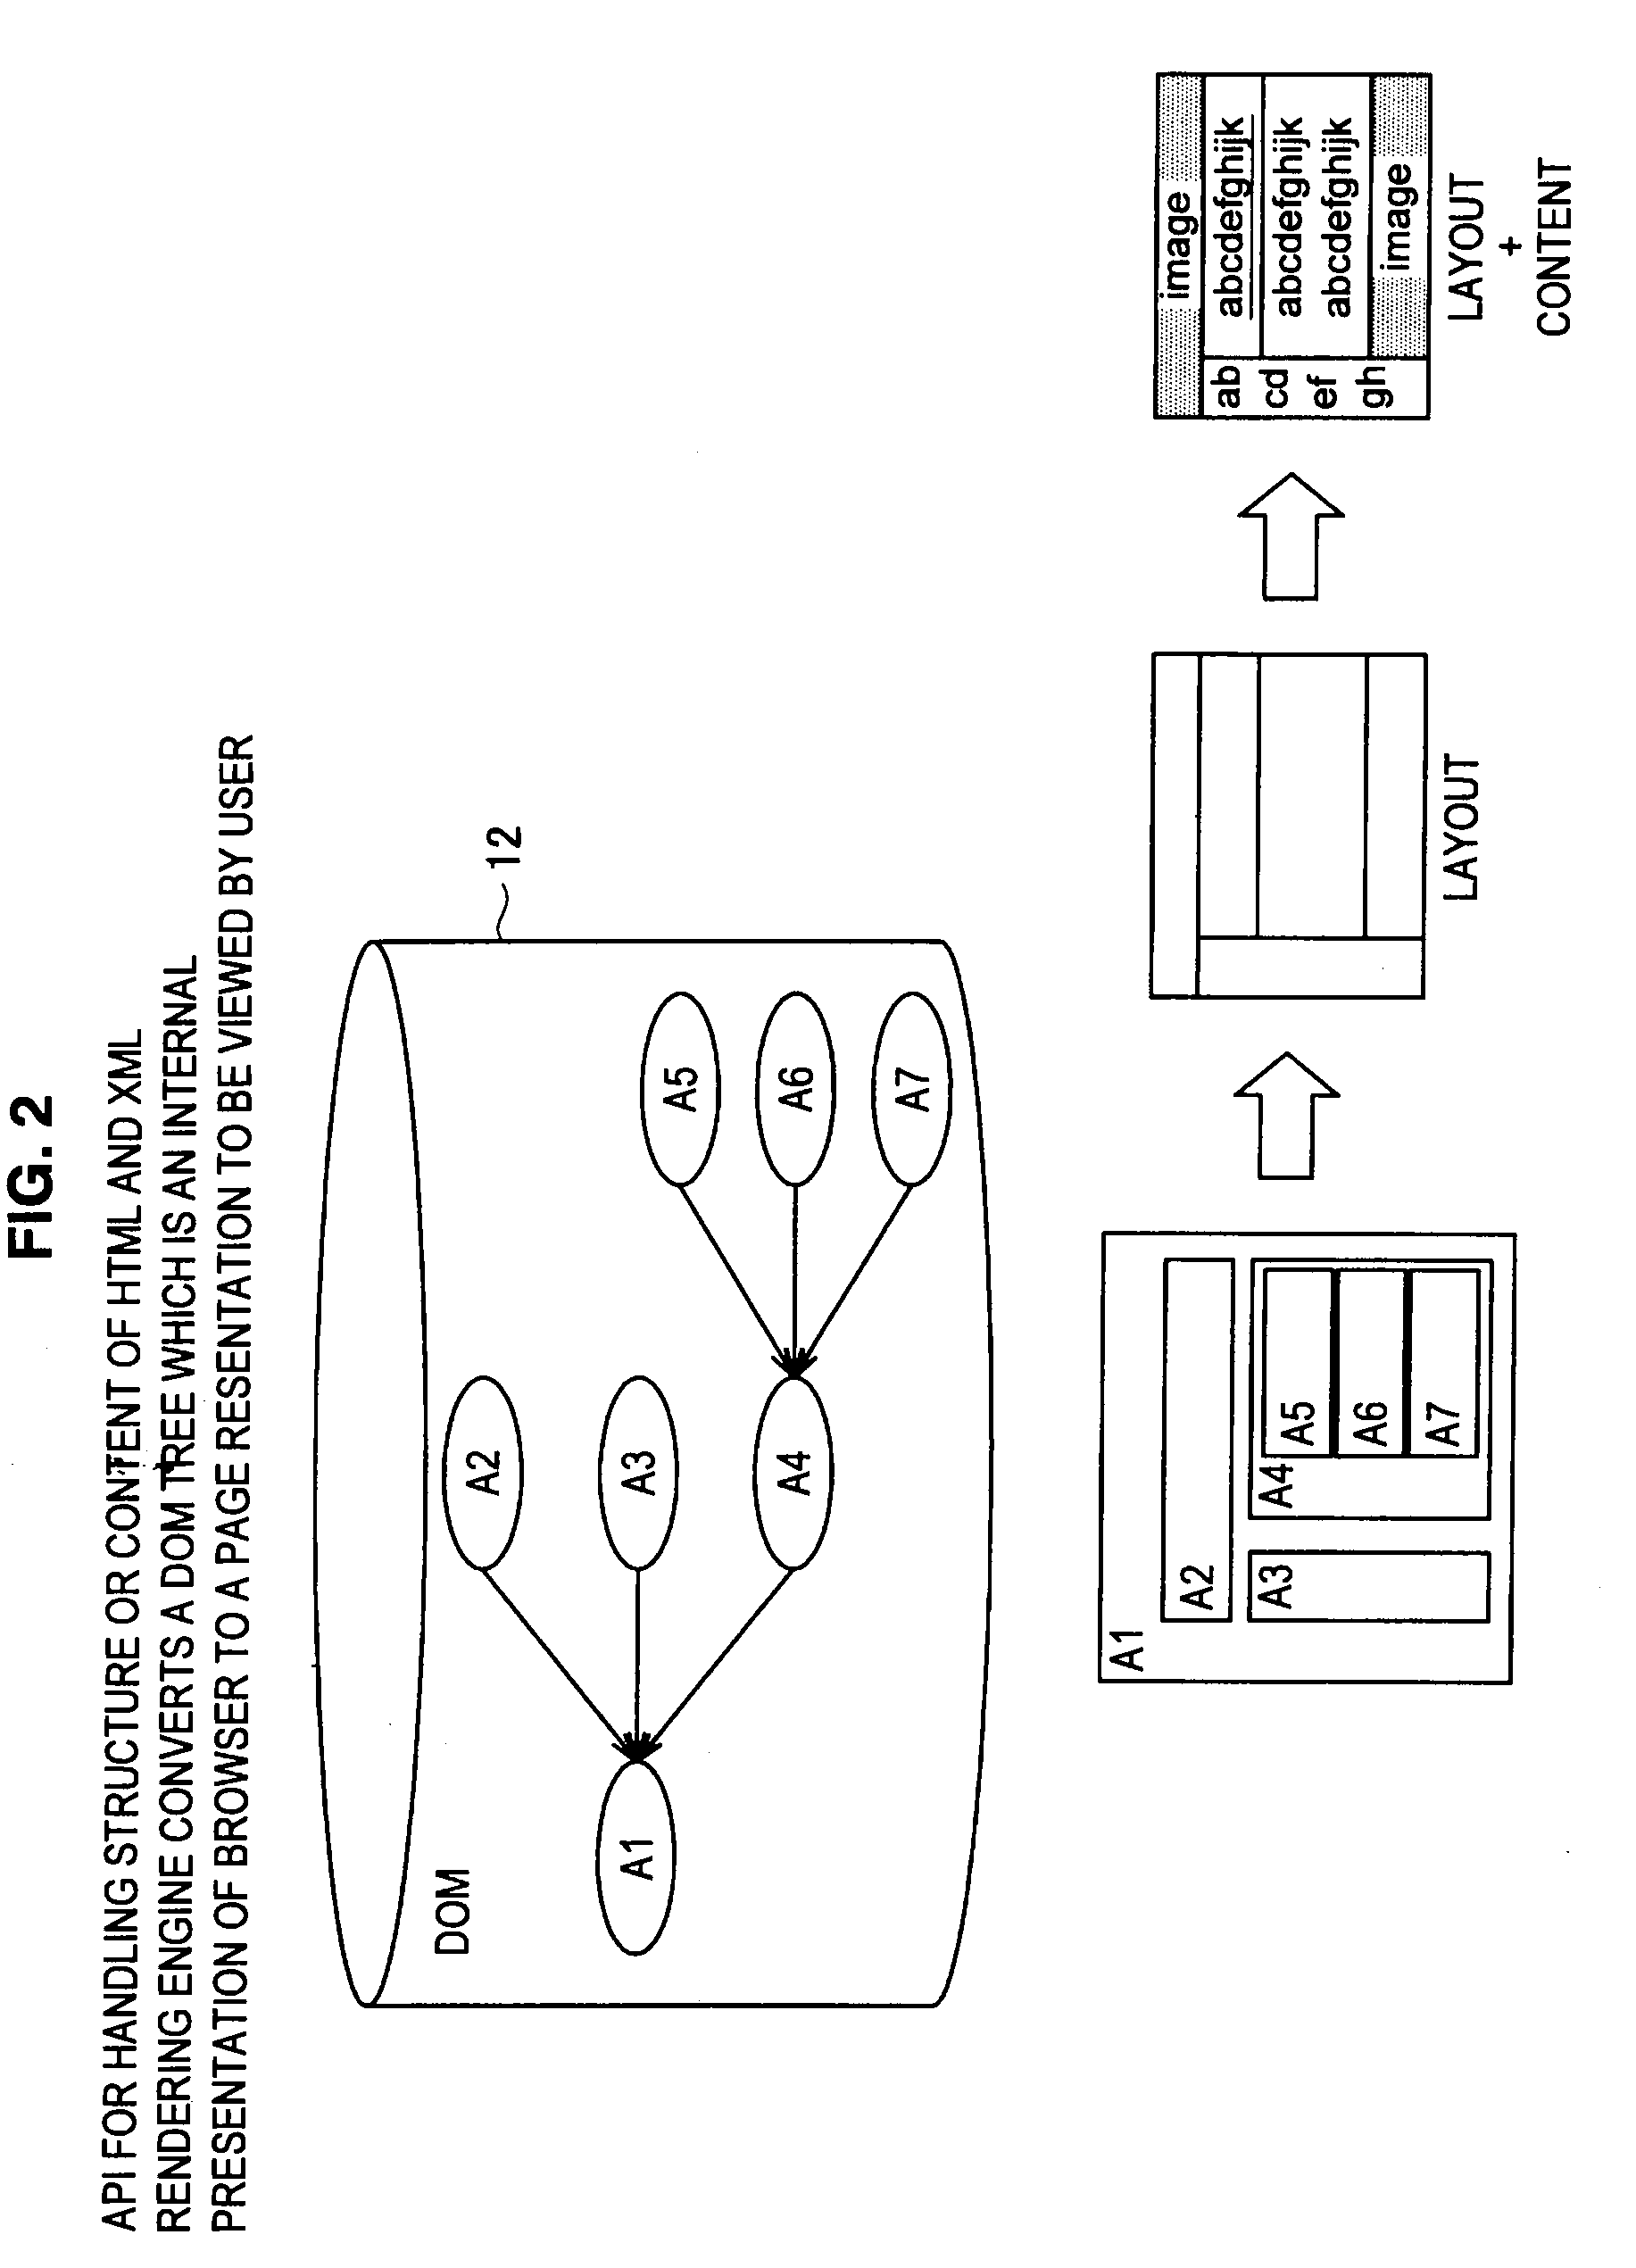 Information processing apparatus, data acquisition method, and program